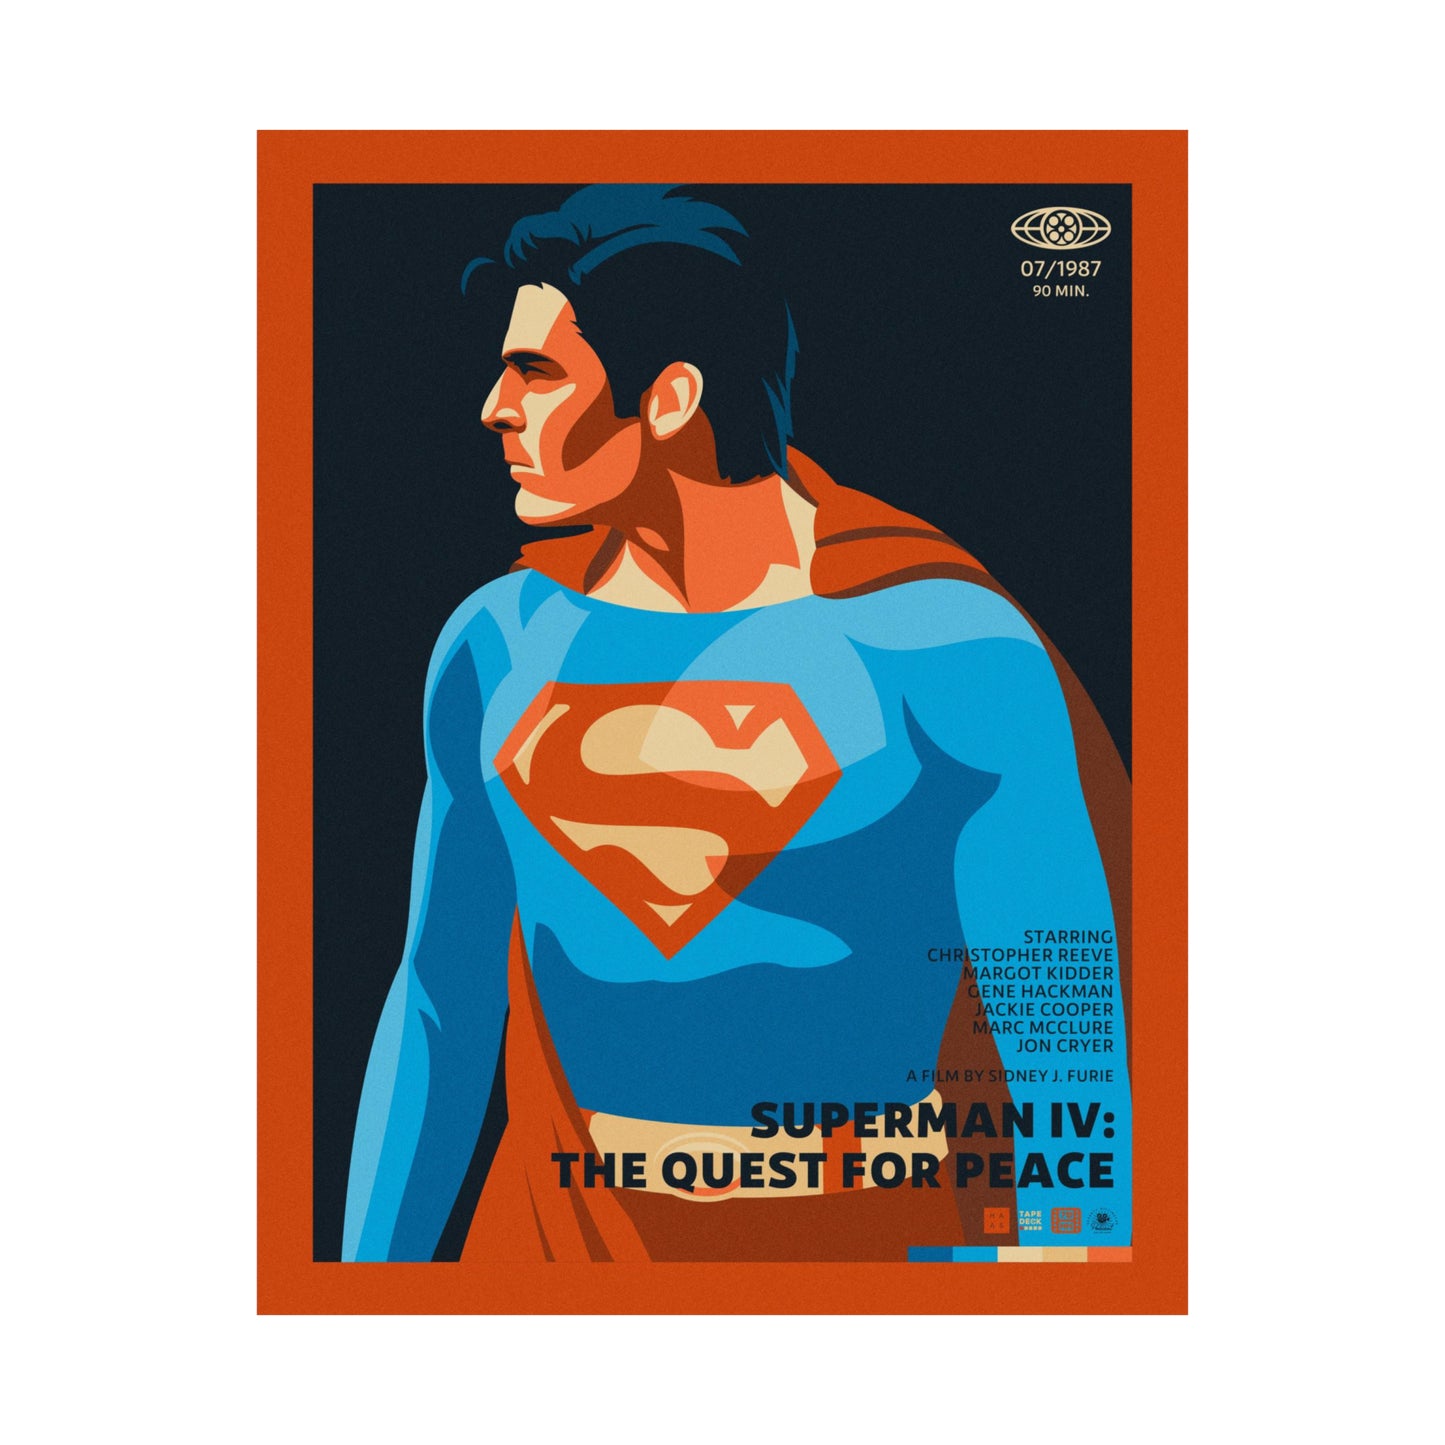 Episode 170: Superman IV: The Quest for Peace